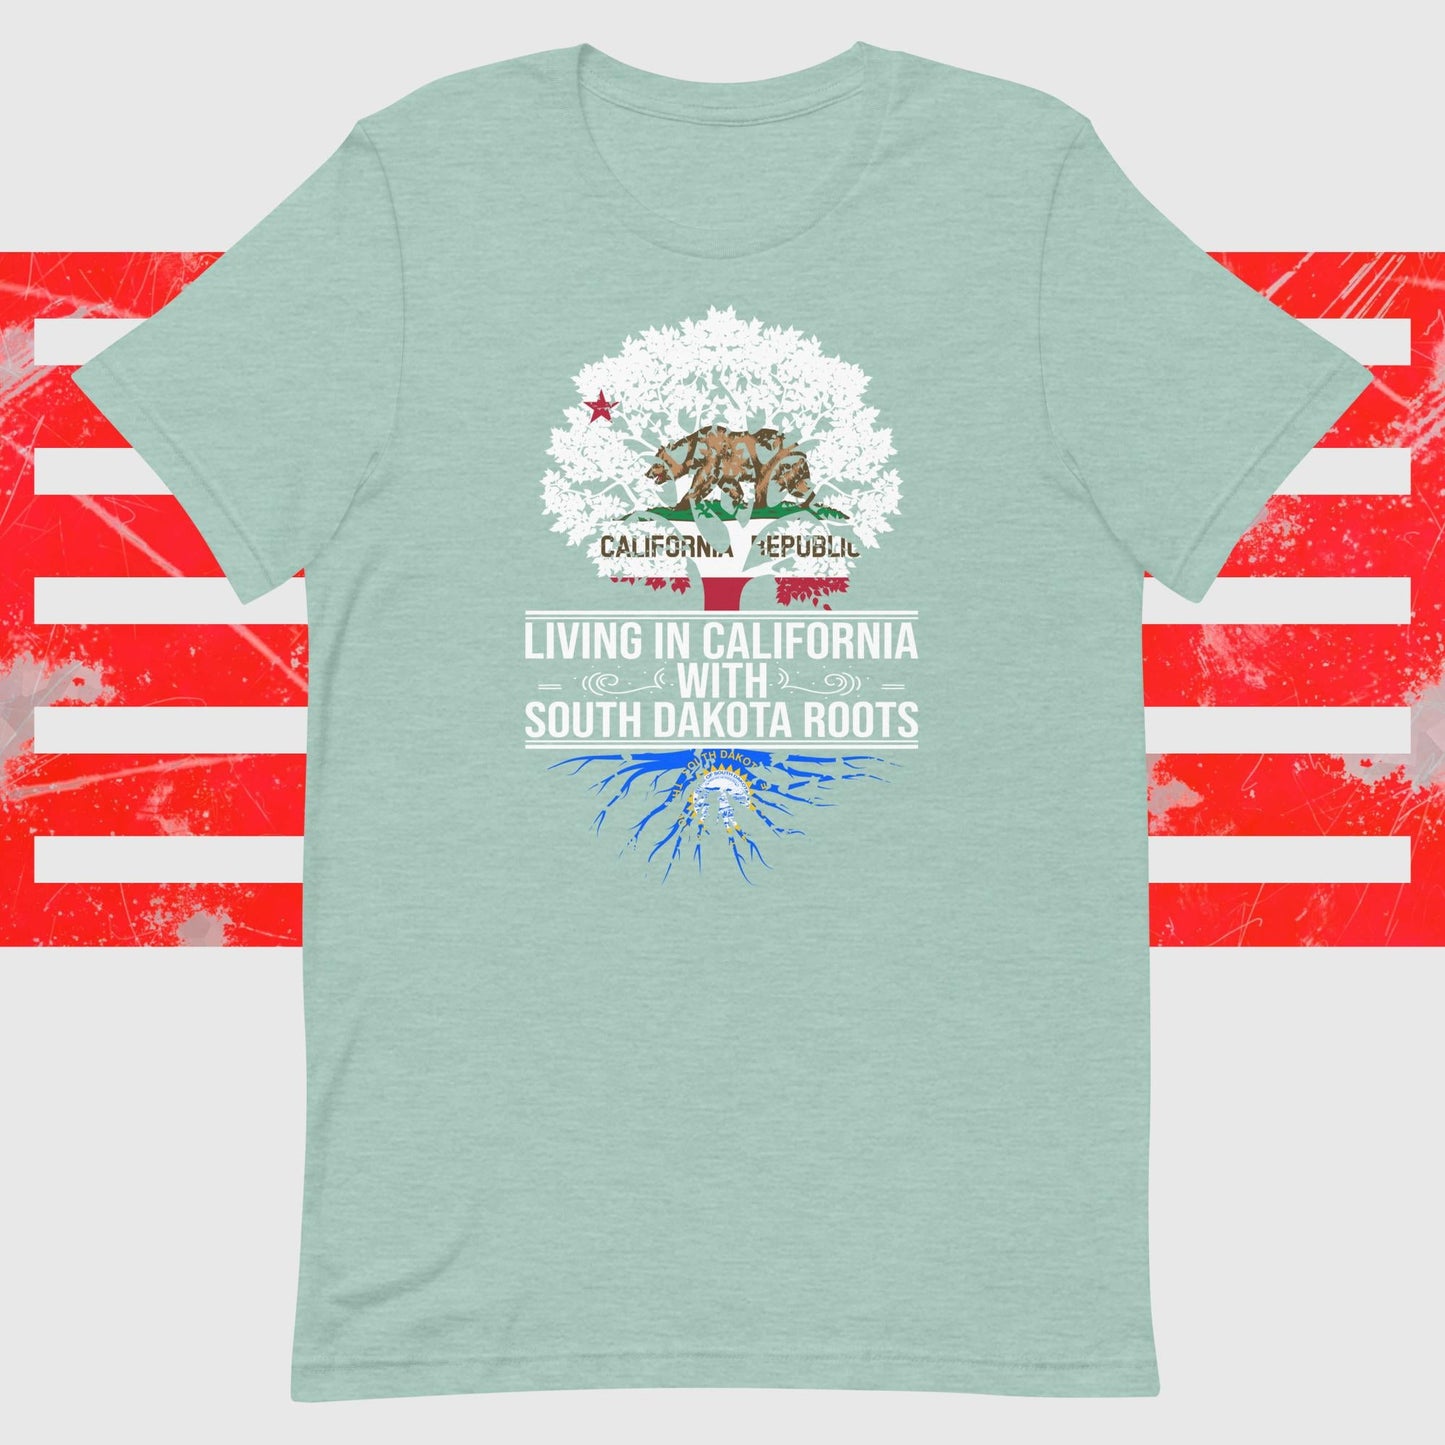 Living In California With South Dakota Roots - The Dude Abides - T-shirt - california - clever - design